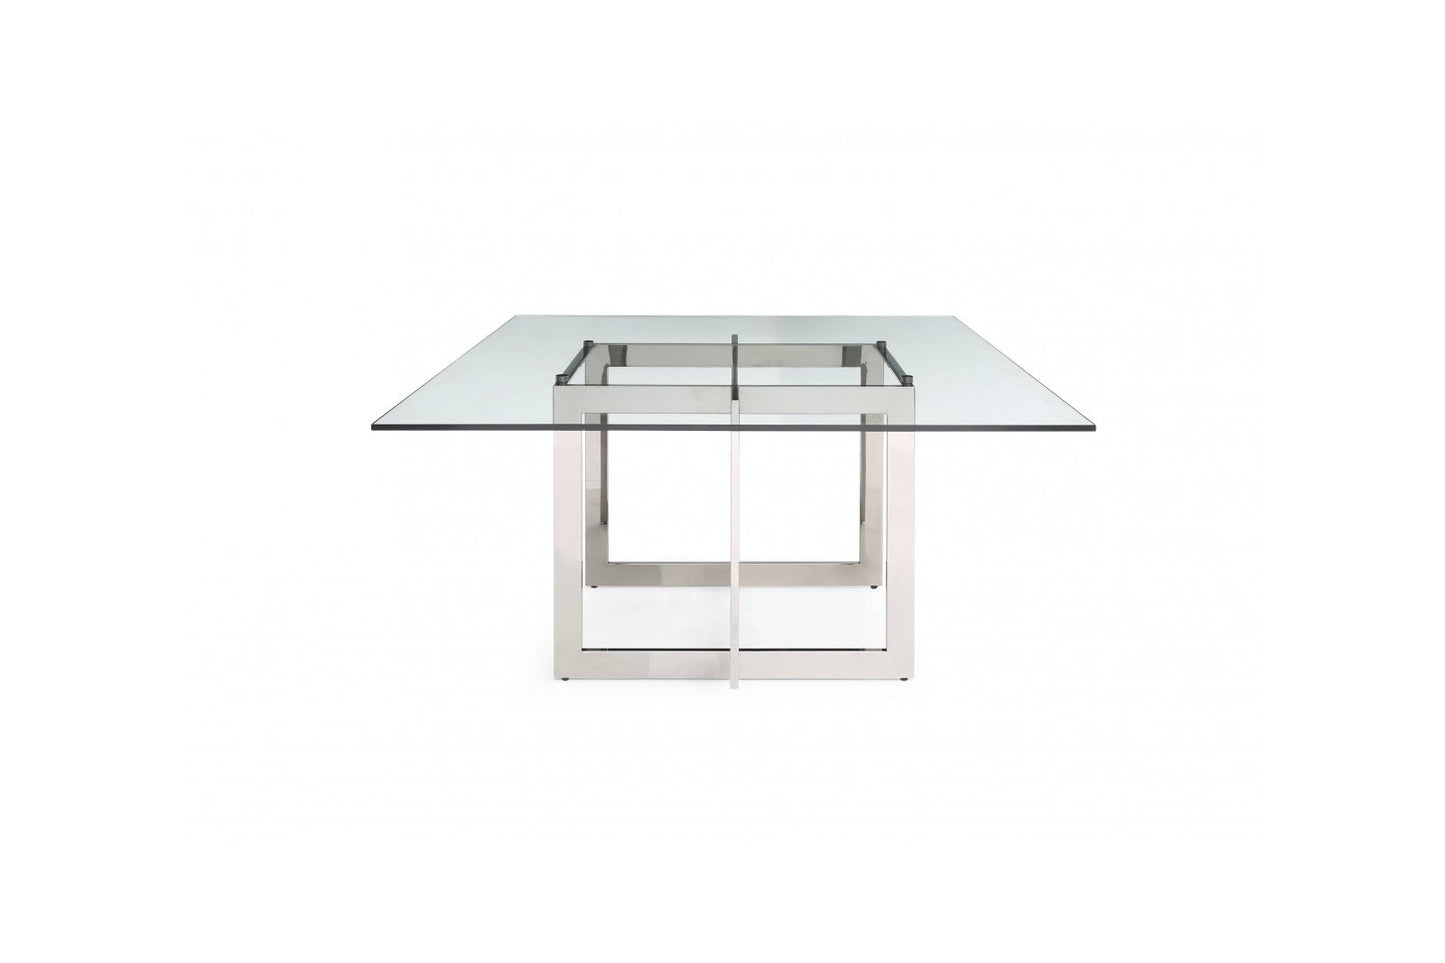 Modrest Keaton - Square Modern Glass + Stainless Steel Dining Table